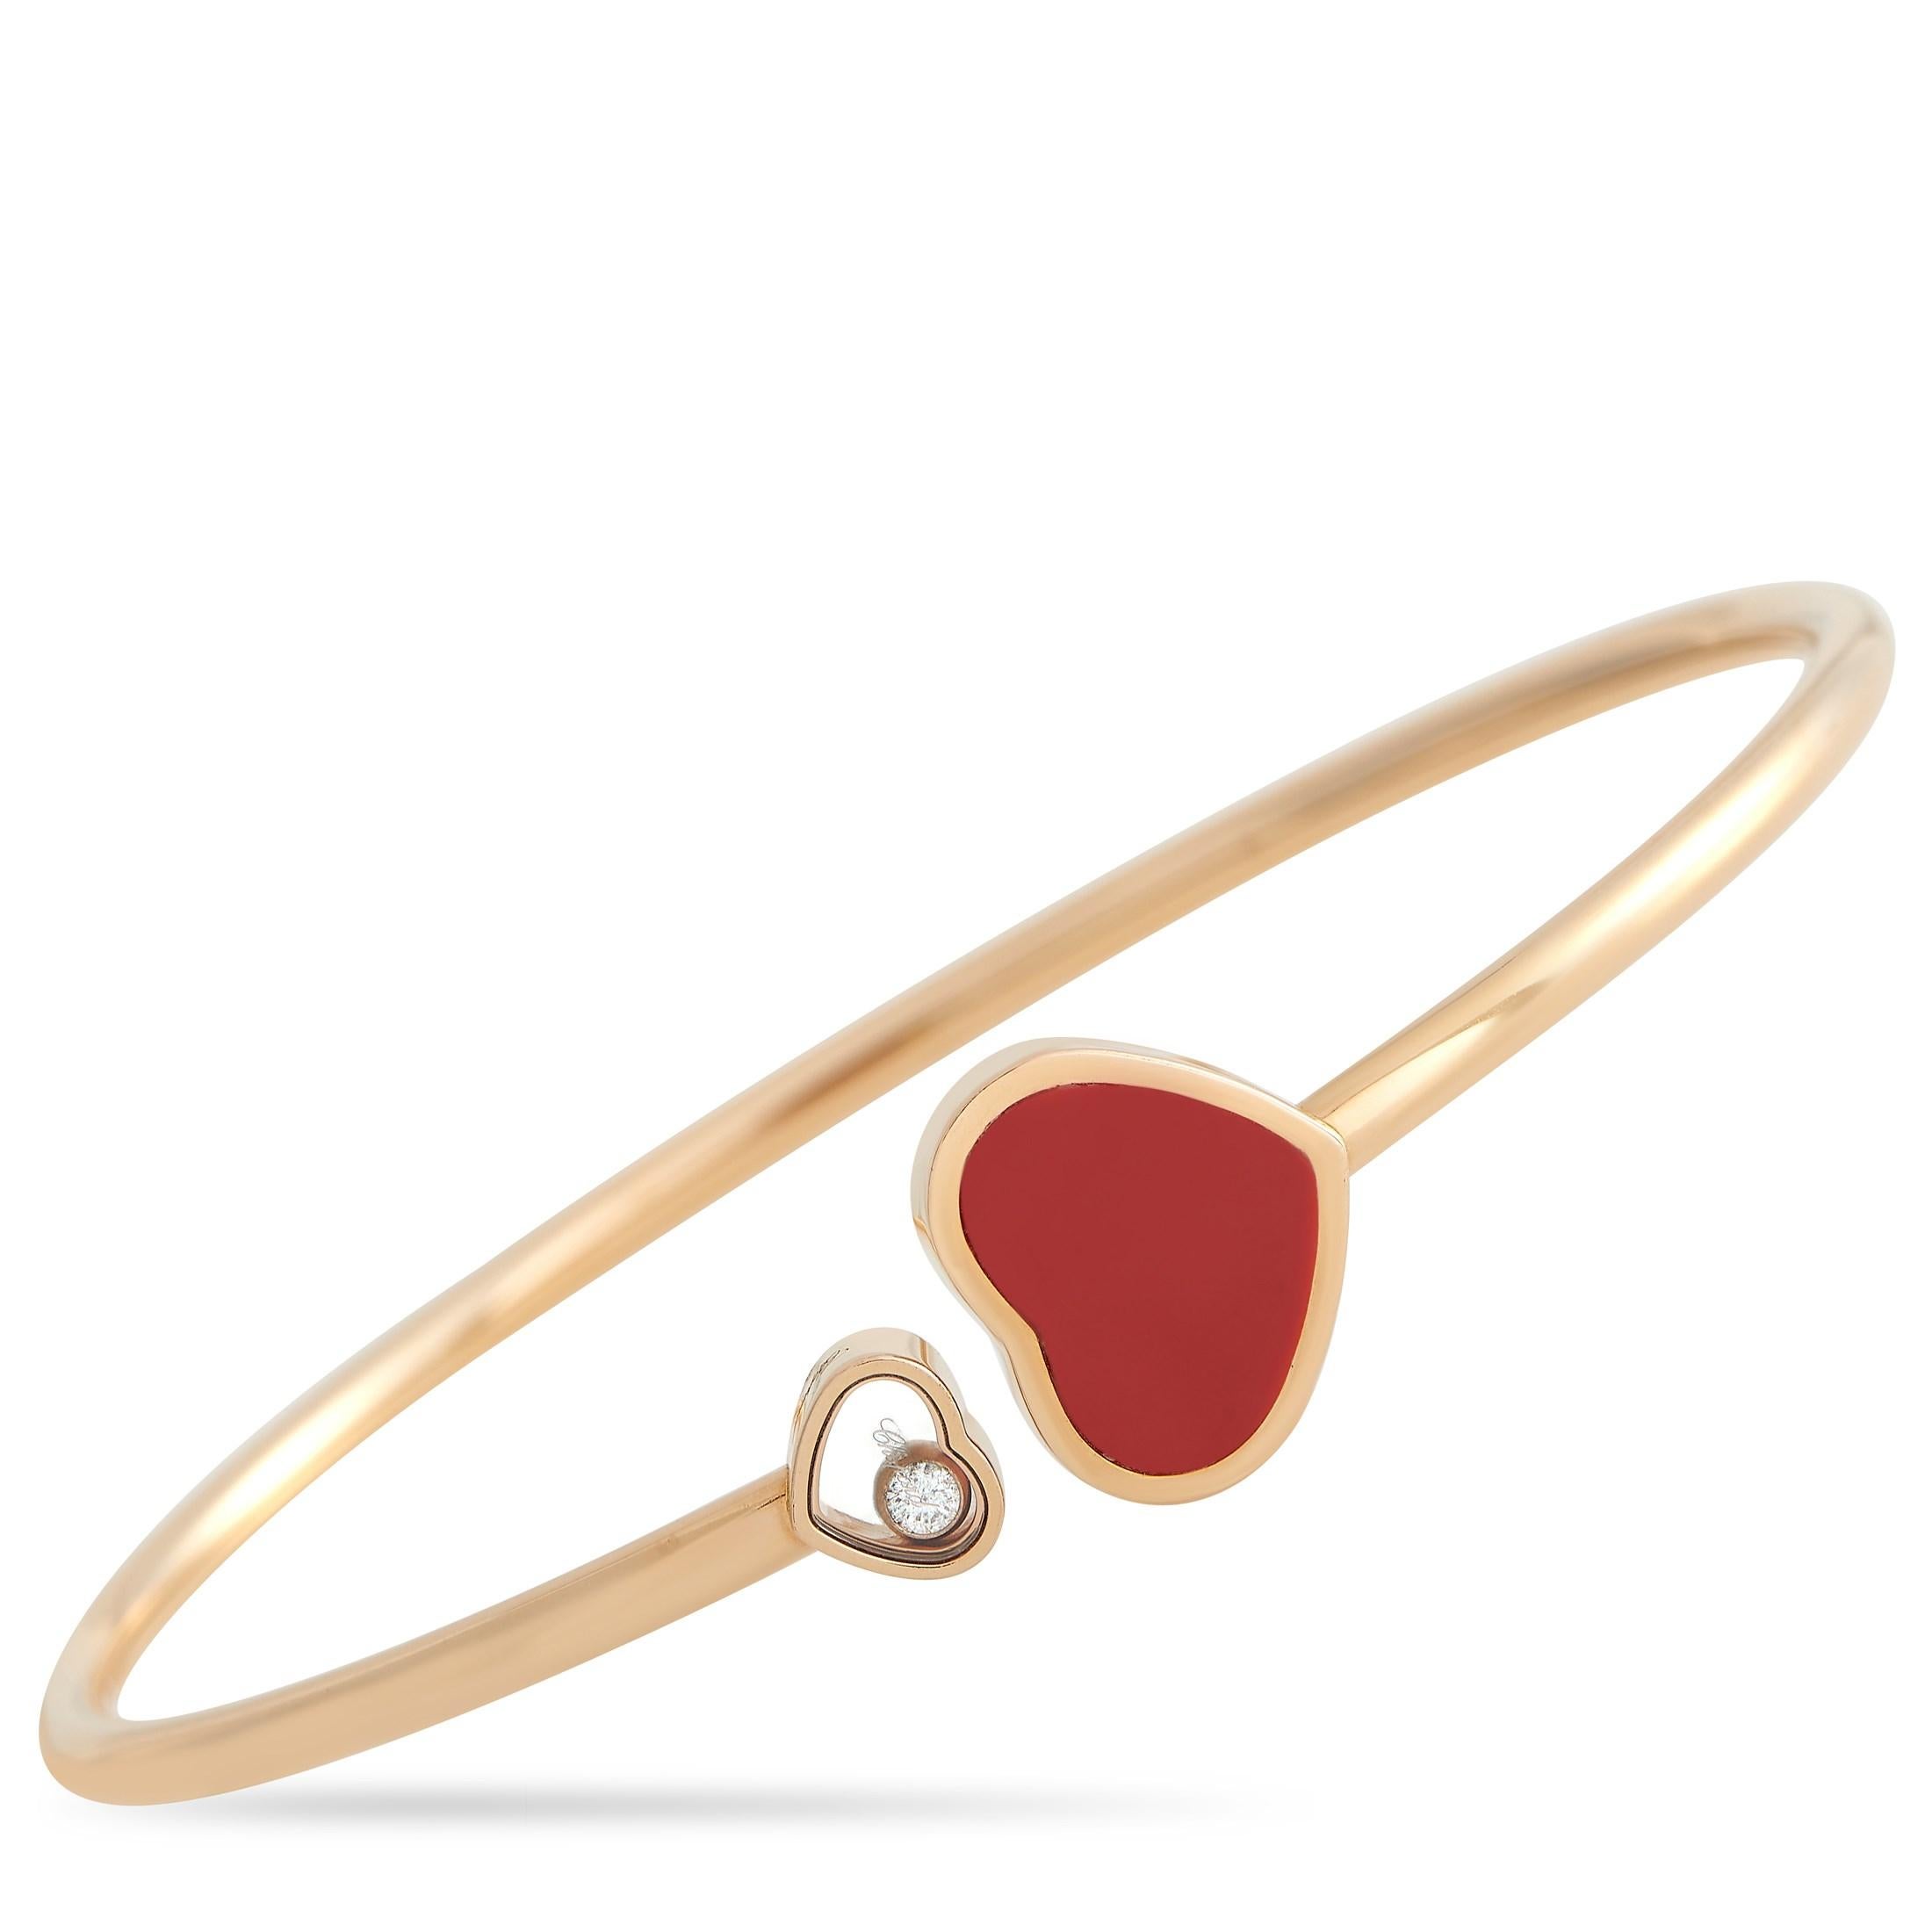 Celebrate love with this Chopard Happy Hearts 18K rose gold bracelet. This structured wrist accessory is made from 18K rose gold and features the Swiss Maison's iconic dancing diamond. Set in a small heart with sapphire glass panes is a dancing